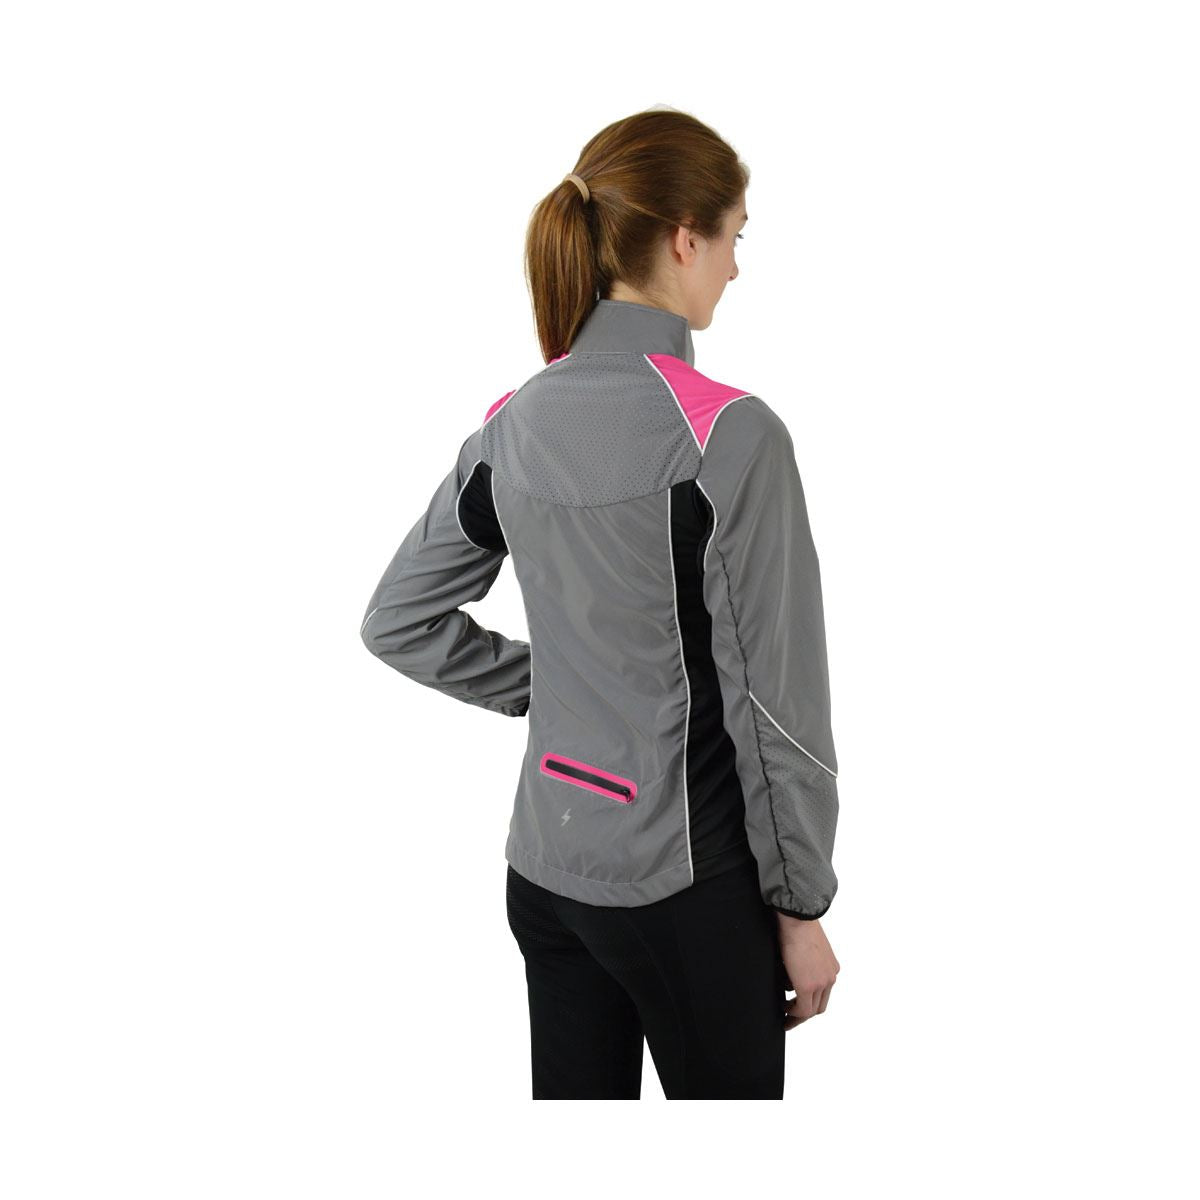 Silva Flash Two Tone Reflective Jacket by Hy Equestrian - Just Horse Riders